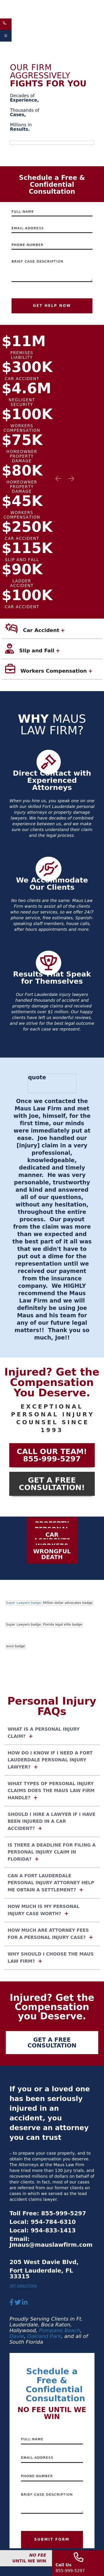 Maus Law Firm - Fort Lauderdale FL Lawyers